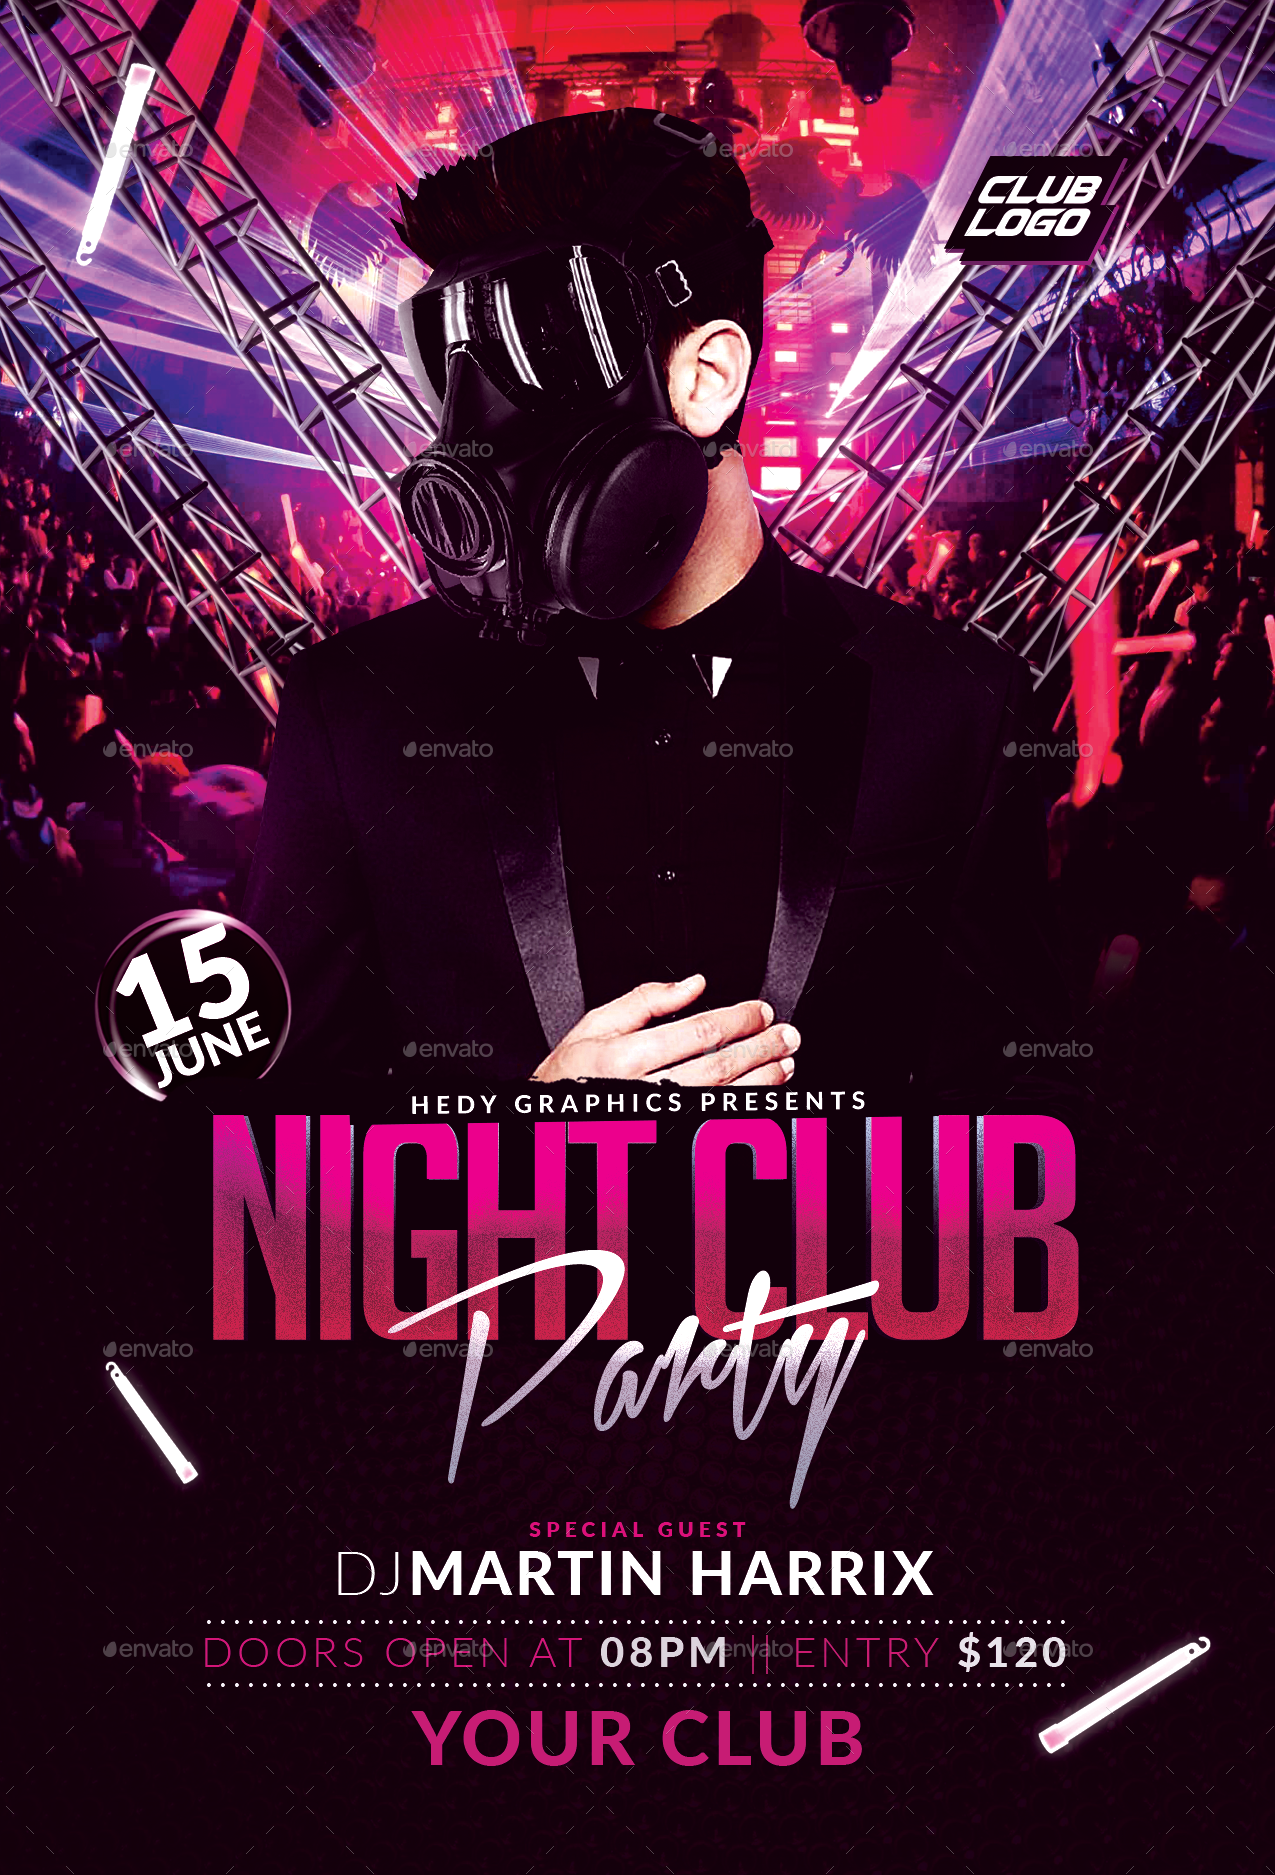 Night Club Flyer Template By Hedygraphics Graphicriver